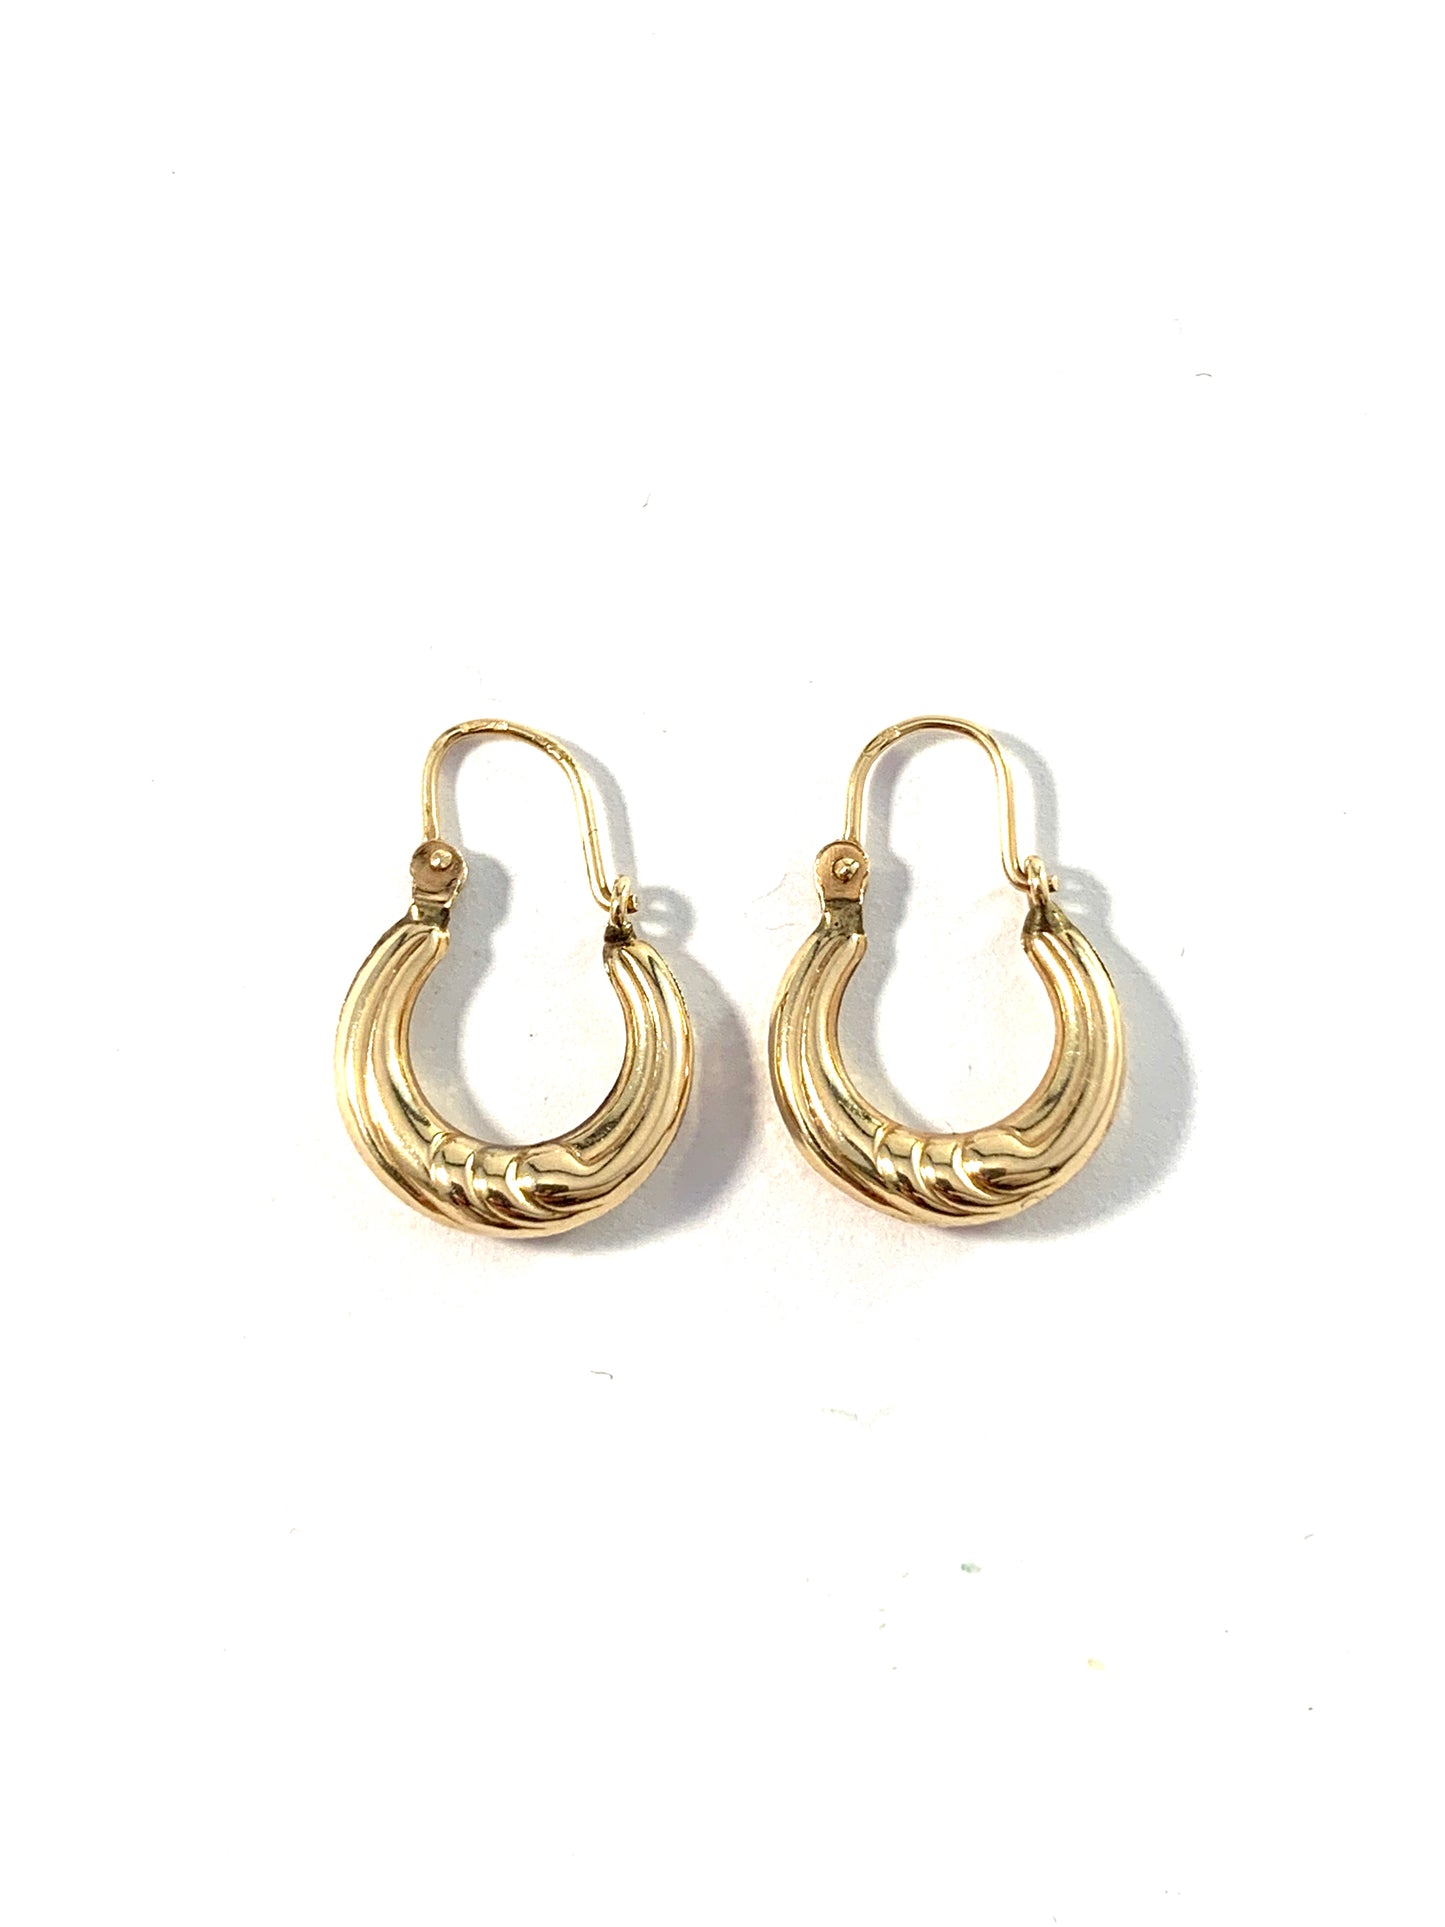 Vintage Mid Century 14k Gold Hollow Earrings. Possibly Austria.